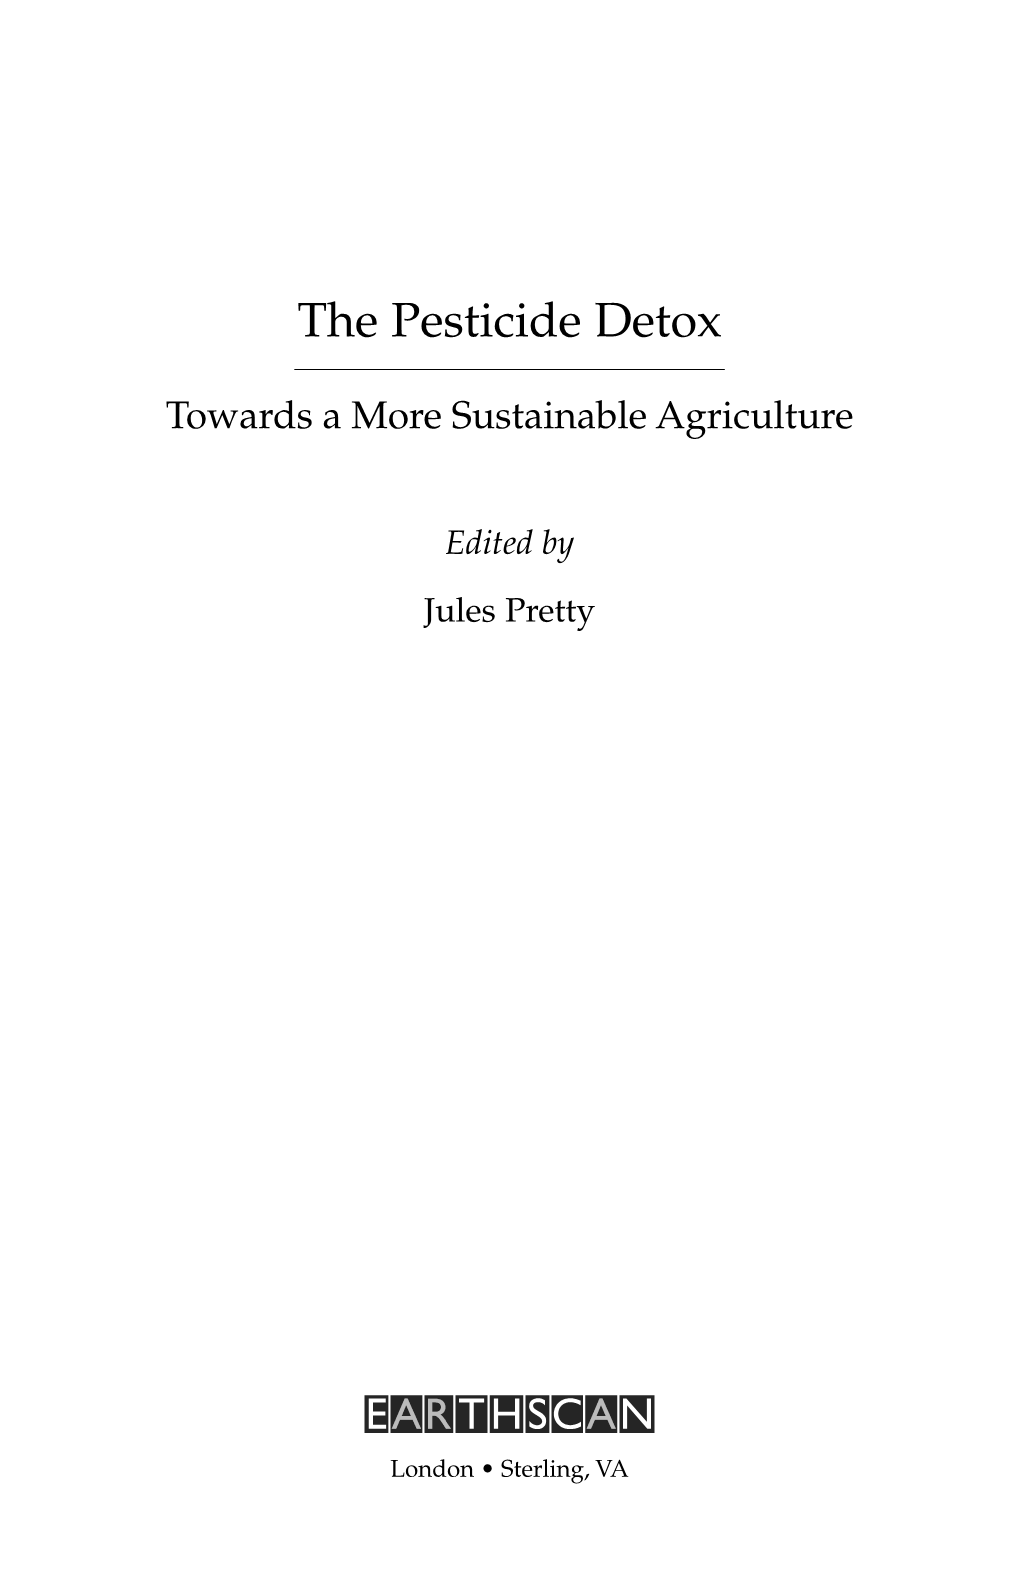 Earthscan Publications the Pesticide Detox Towards a More Sustainable